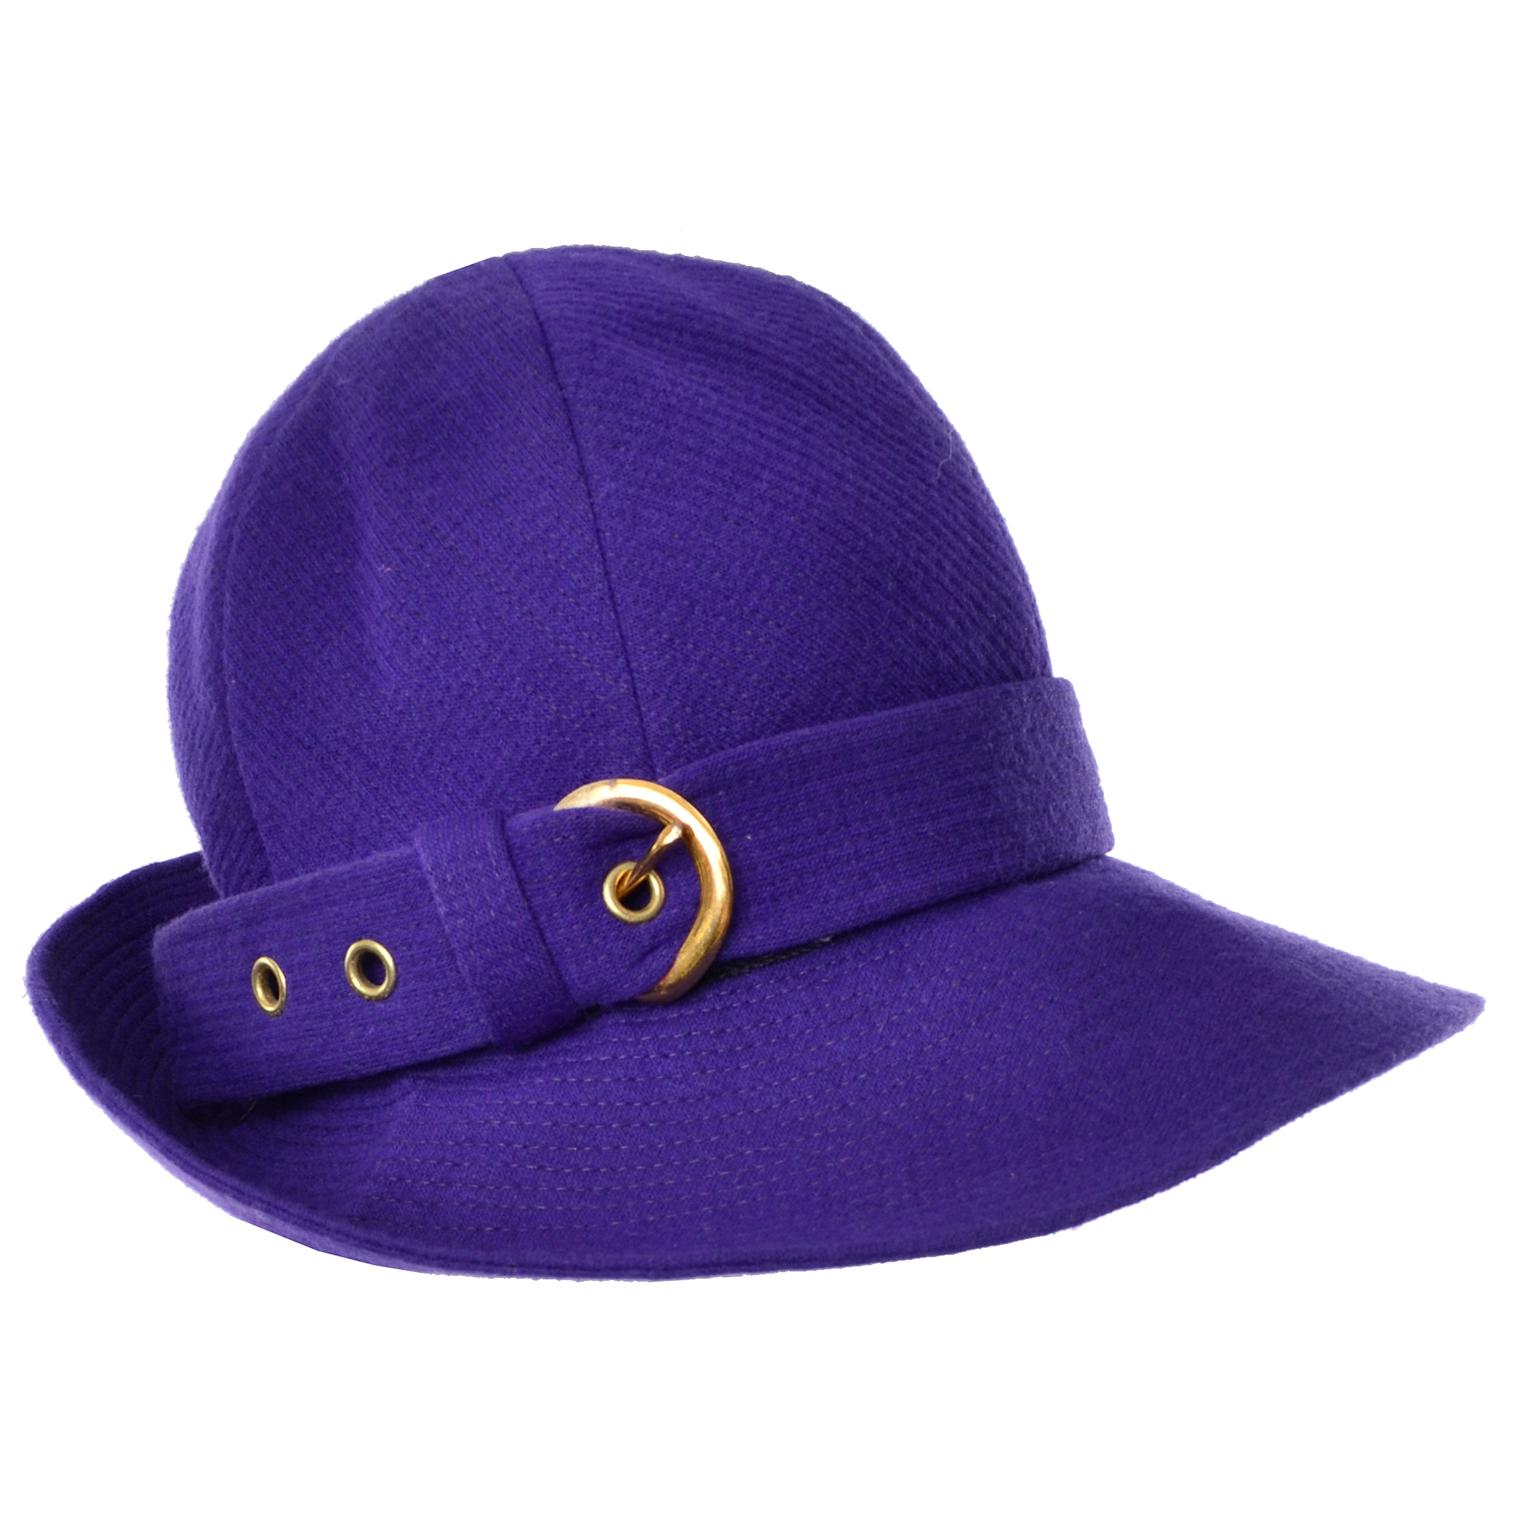 This is an incredible vintage Yves Saint Laurent  purple wool hat with a buckle on the side and a wide front brim.  This fabulous vintage YSL hat measures 22